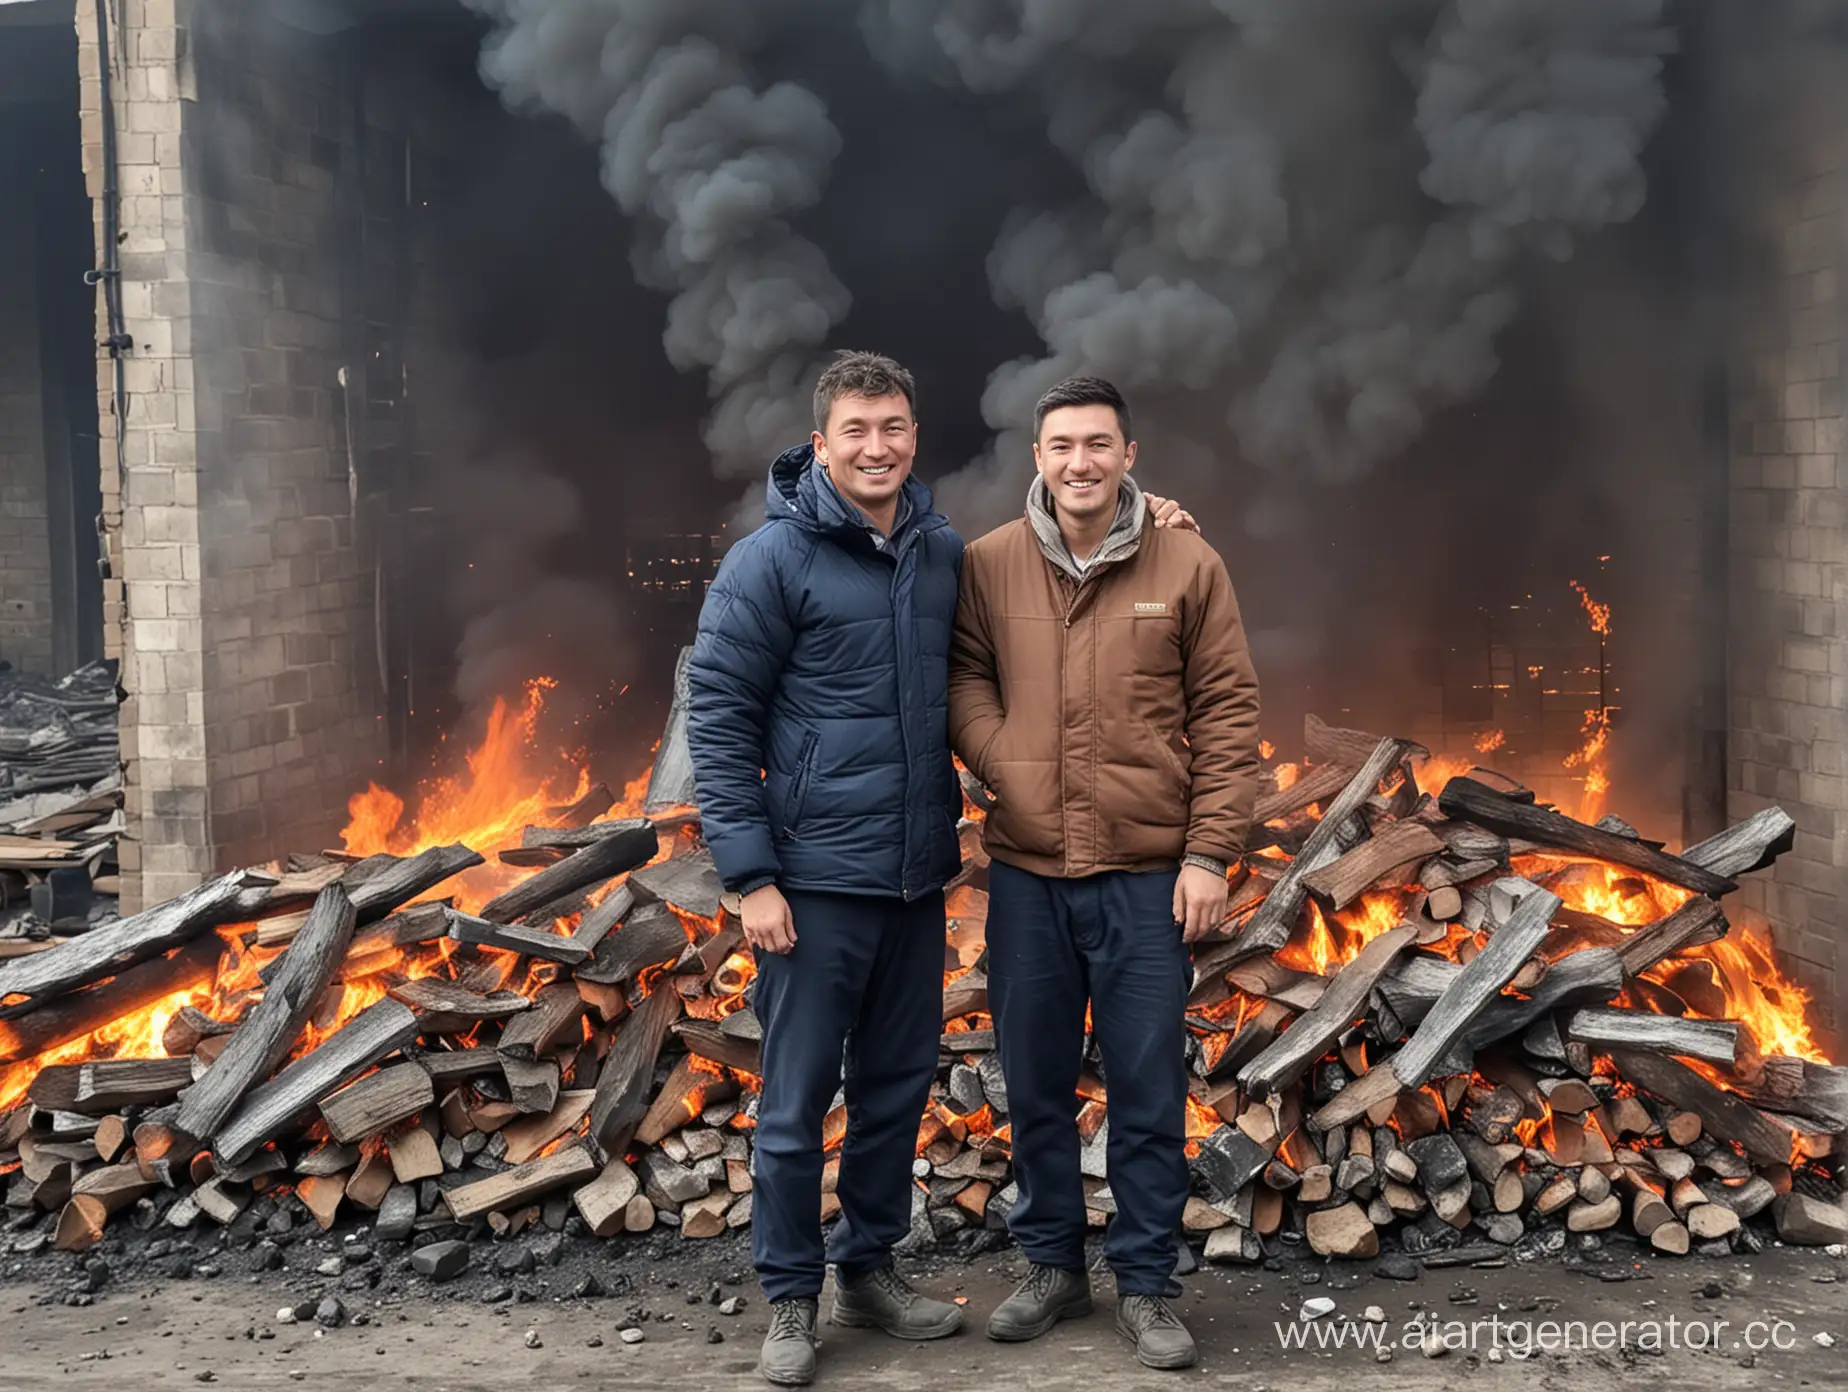 Resilient-Kazakh-Community-Rallies-Together-to-Rebuild-Trading-House-After-Fire